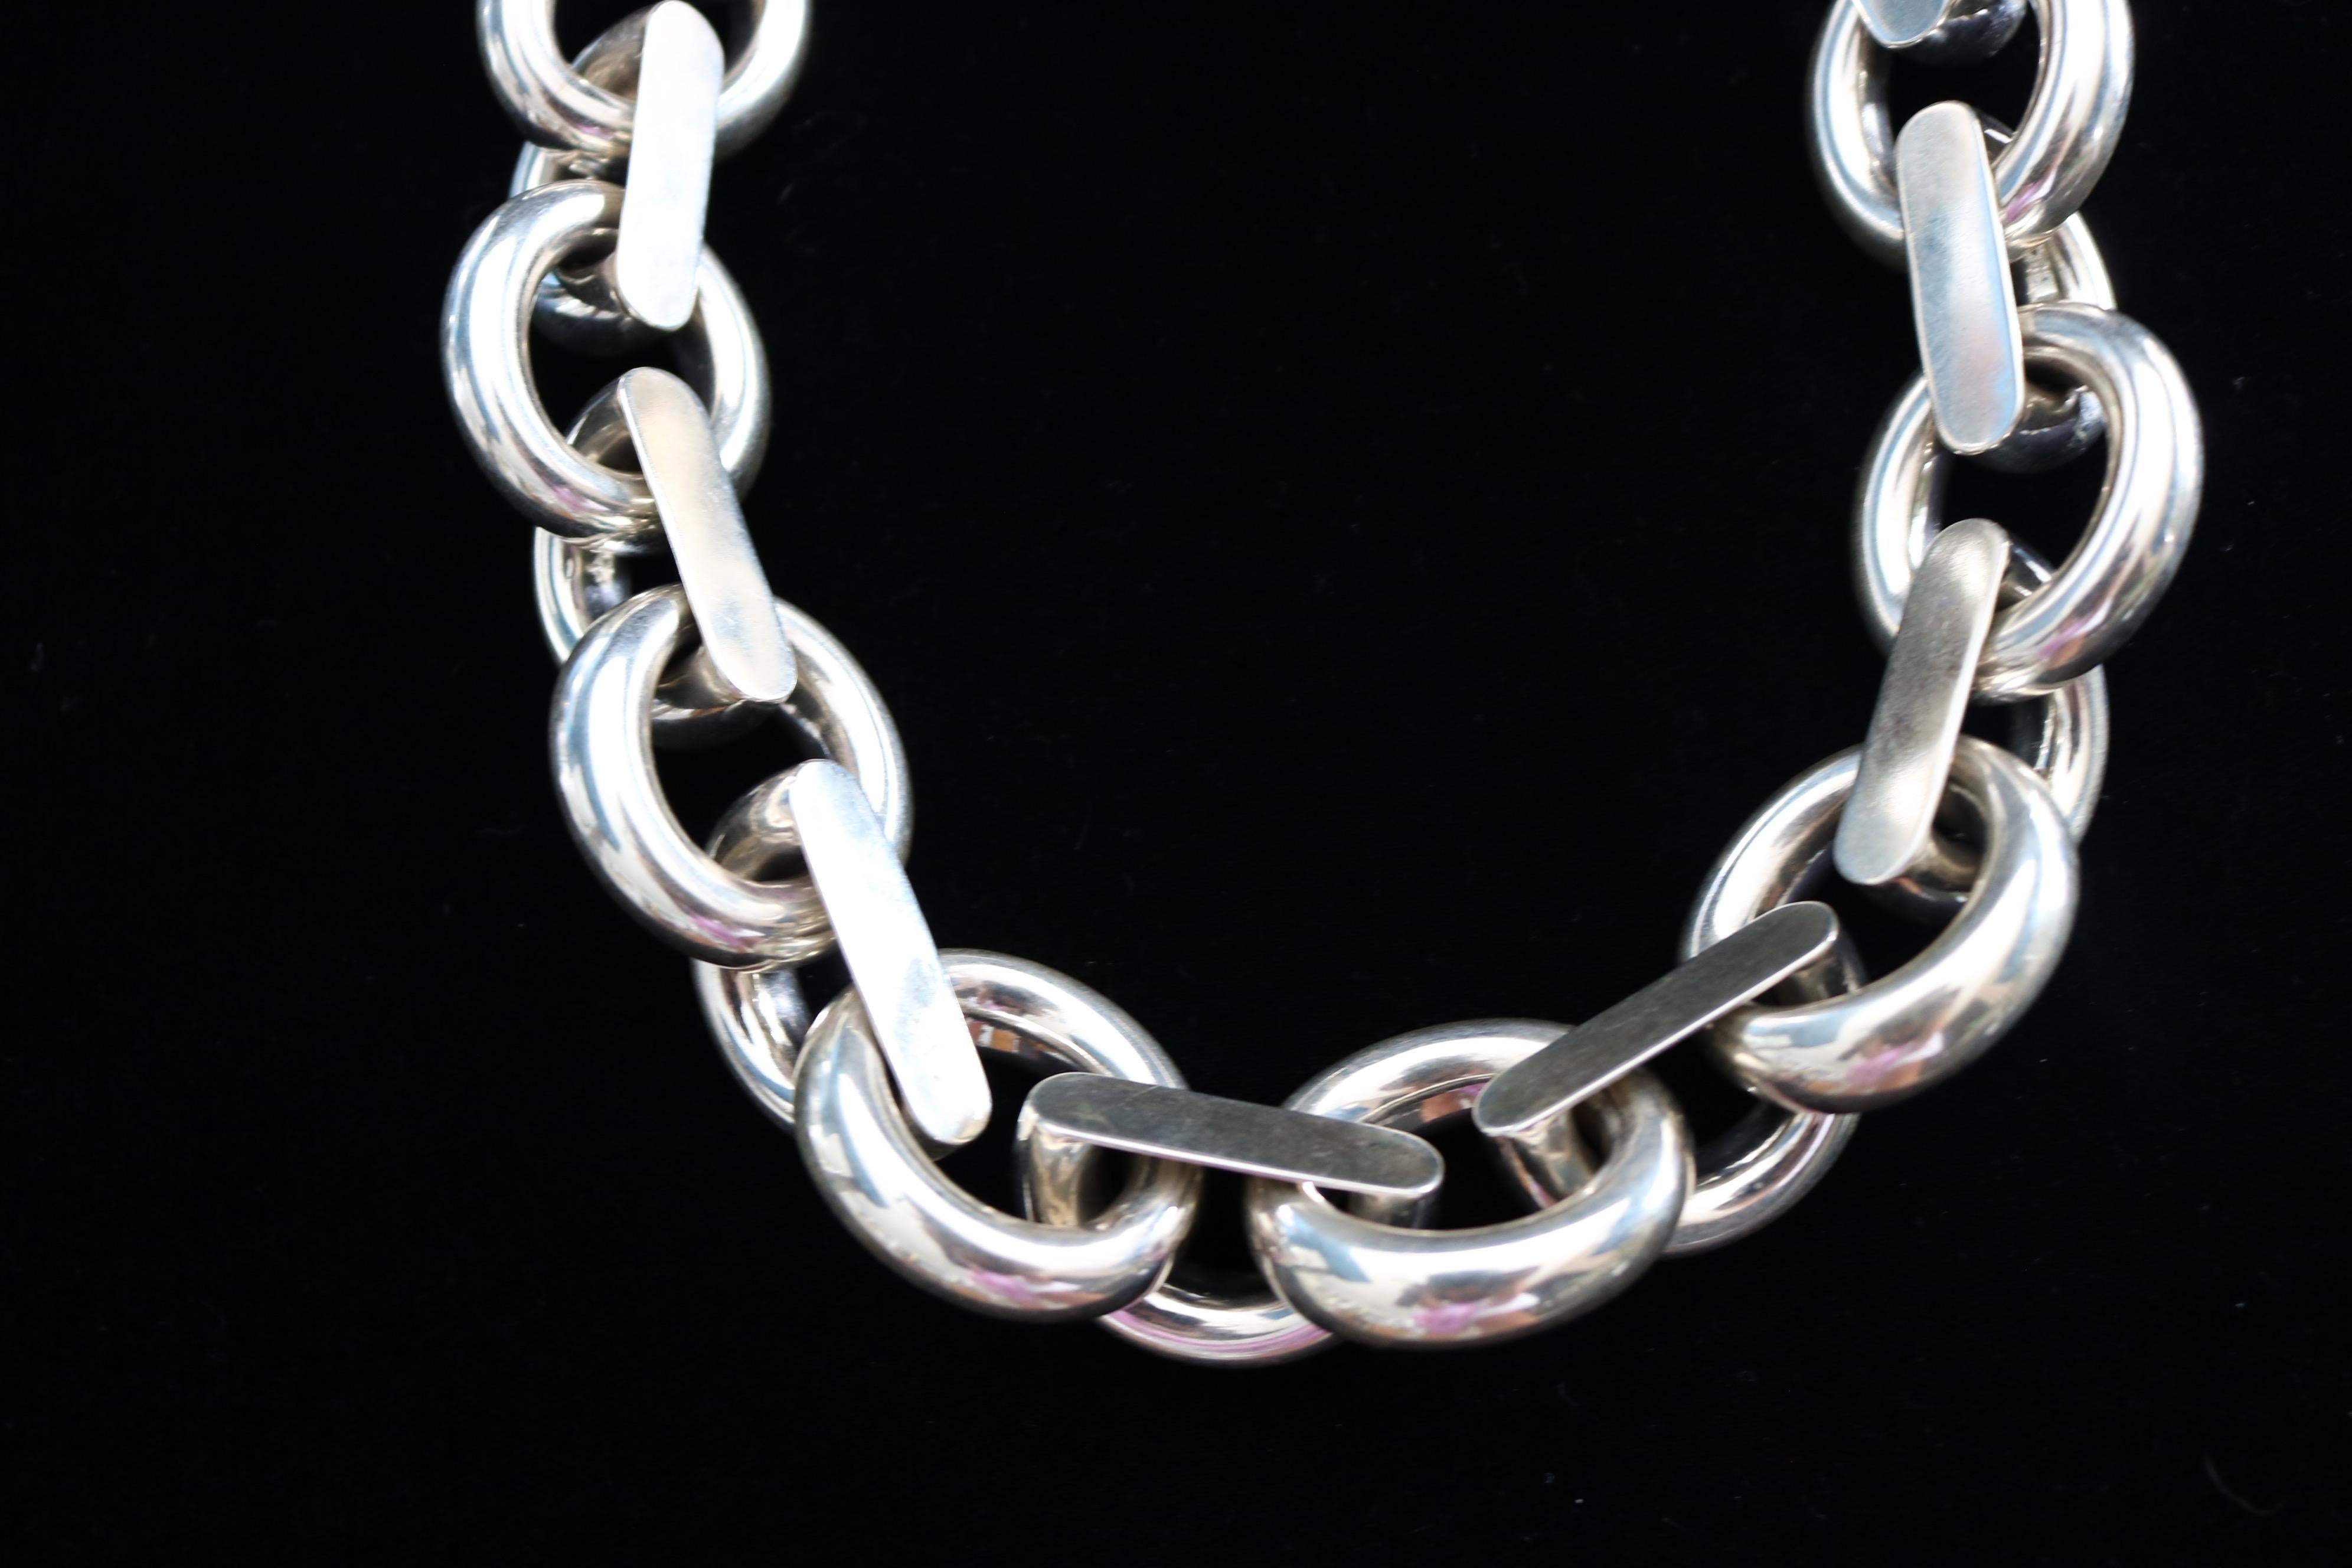 This beautiful XL link silver necklace was handcrafted  for someone that loves to wear a statement piece on a special occasion. This piece is very comfortable, comes with a  practical clasp and it is lightweight.

This necklace is one of our new